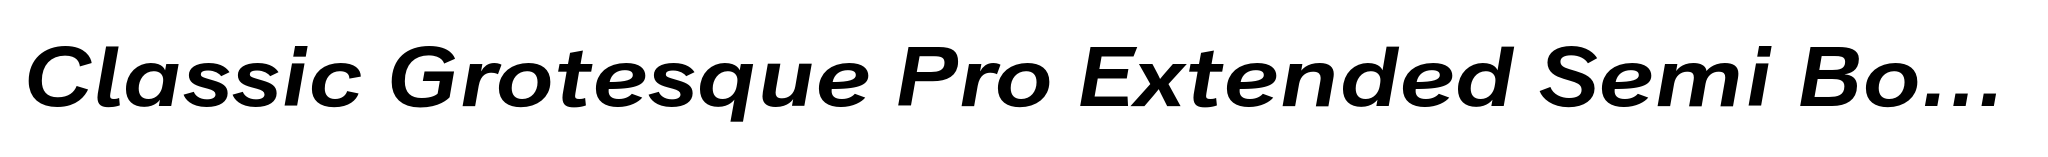 Classic Grotesque Pro Extended Semi Bold Italic image